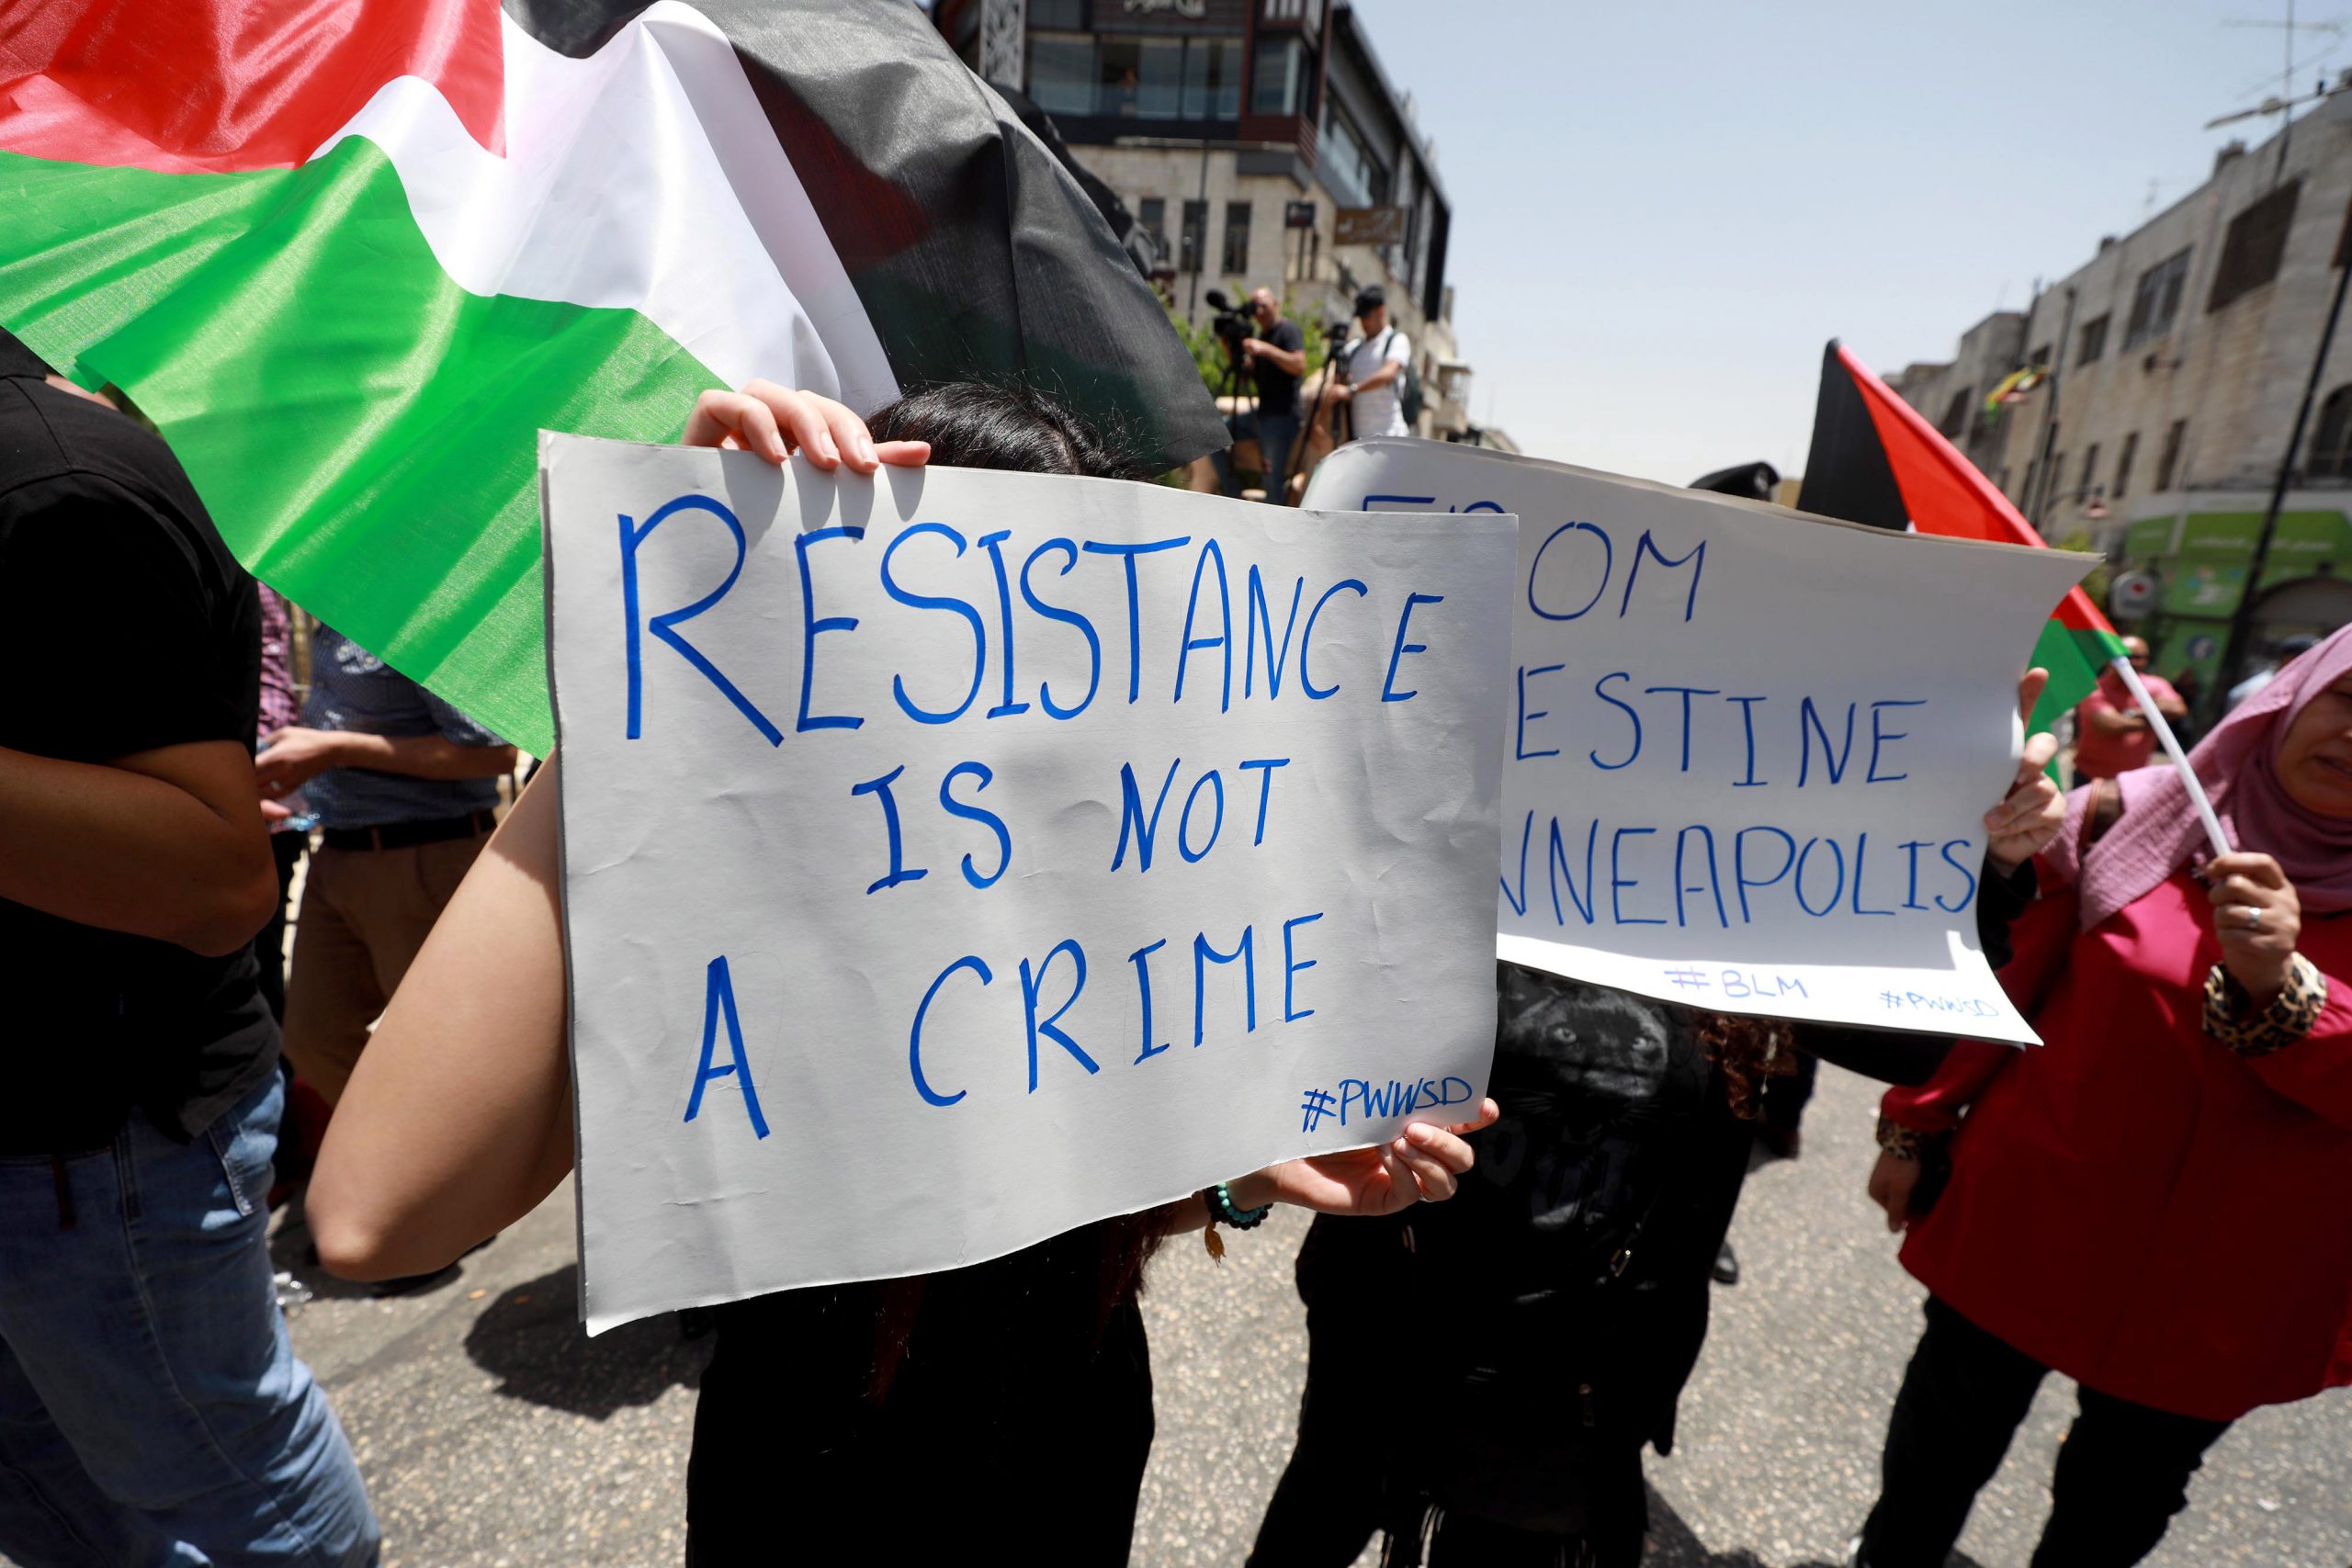 epa08472774 Palestinian protesters hold placards during a protest against Israel's plans to annex parts of West Bank, and in solidarity with the US protesters over the death George Floyd, in the West Bank town of Ramallah, 08 June 2020.  EPA/STR